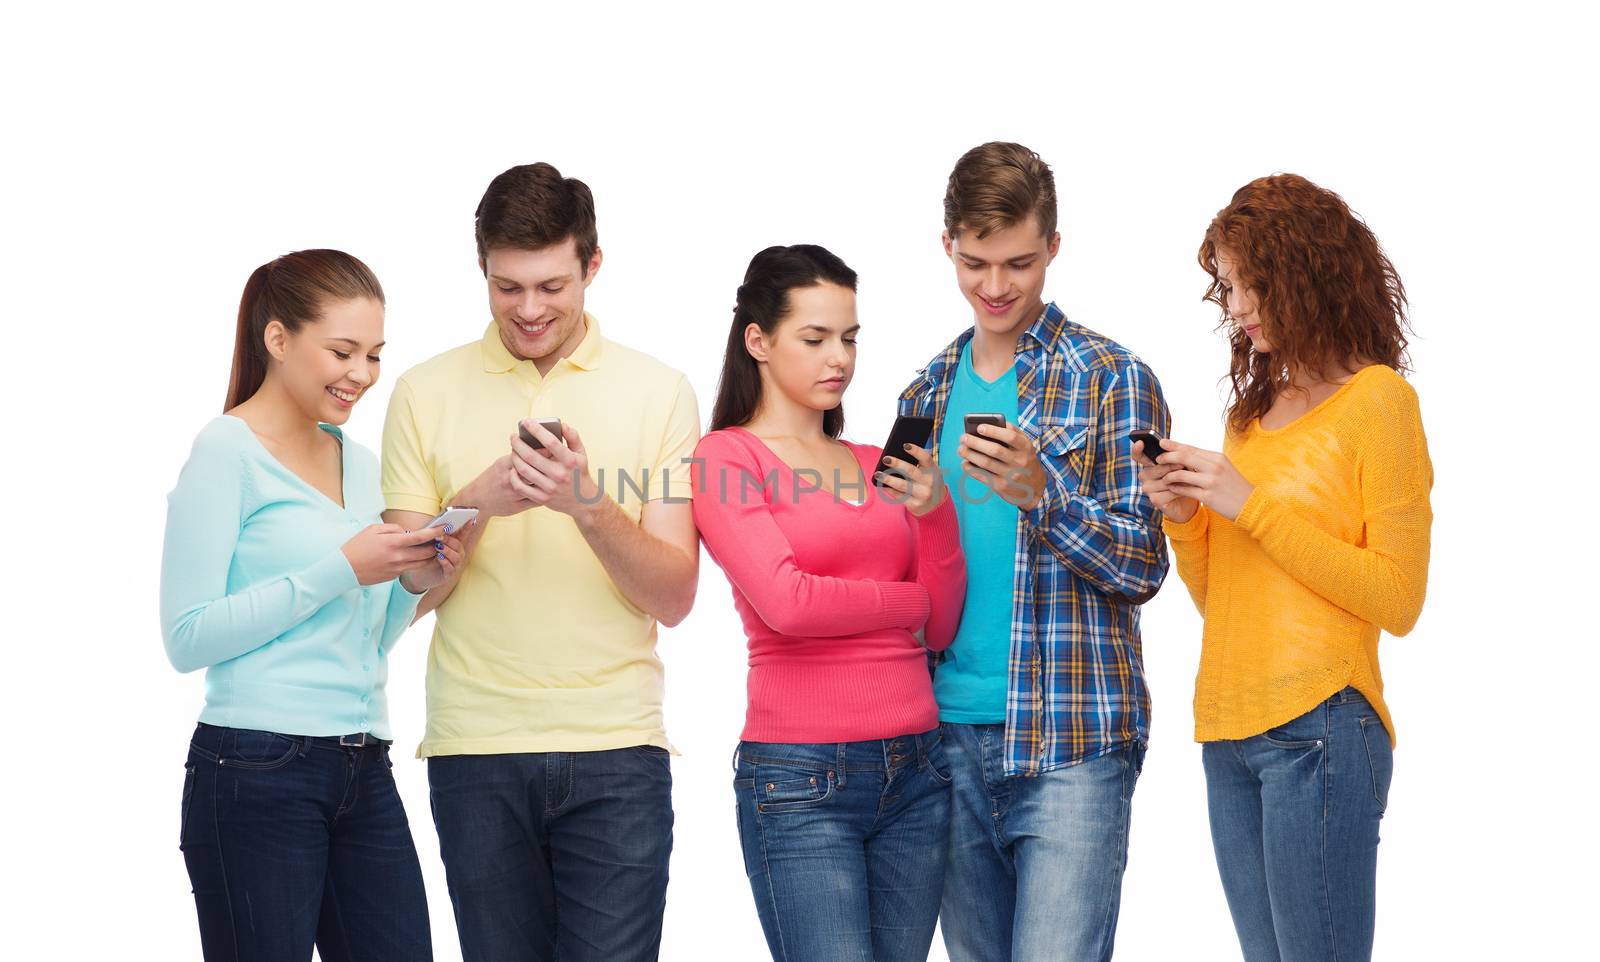 group of smiling teenagers with smartphones by dolgachov